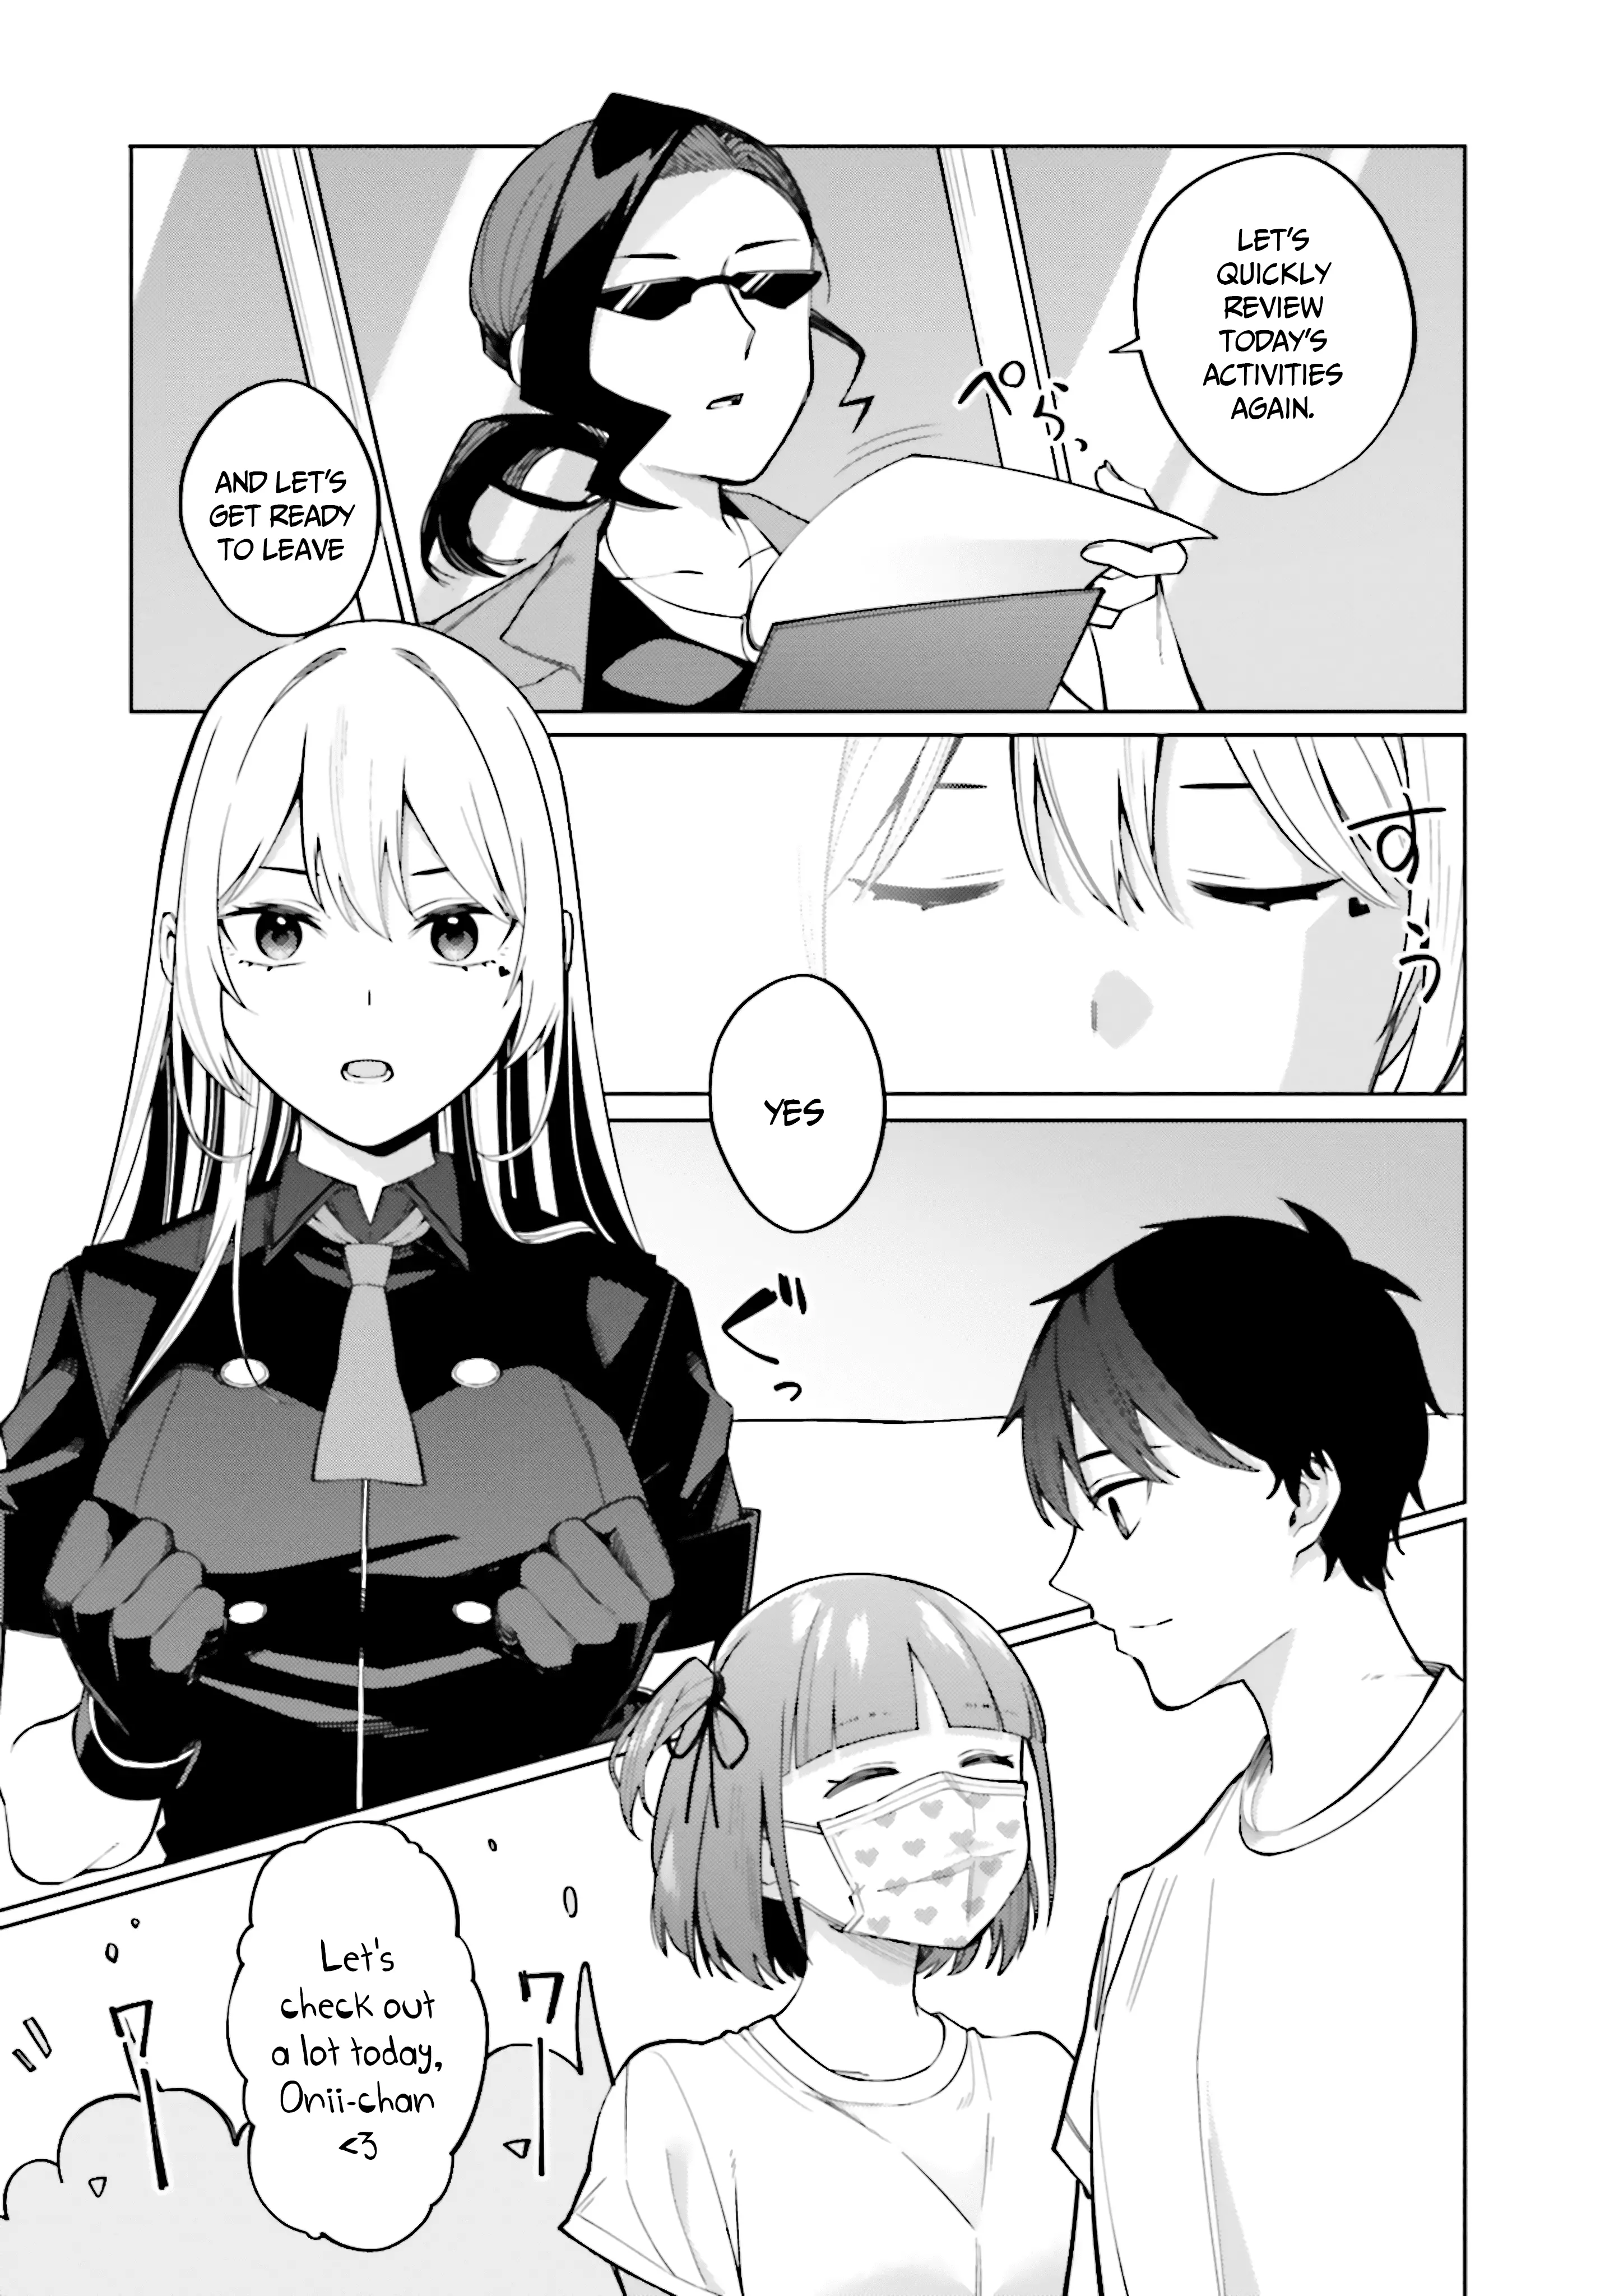 I Don't Understand Shirogane-San's Facial Expression At All - 14 page 26-30e9859d